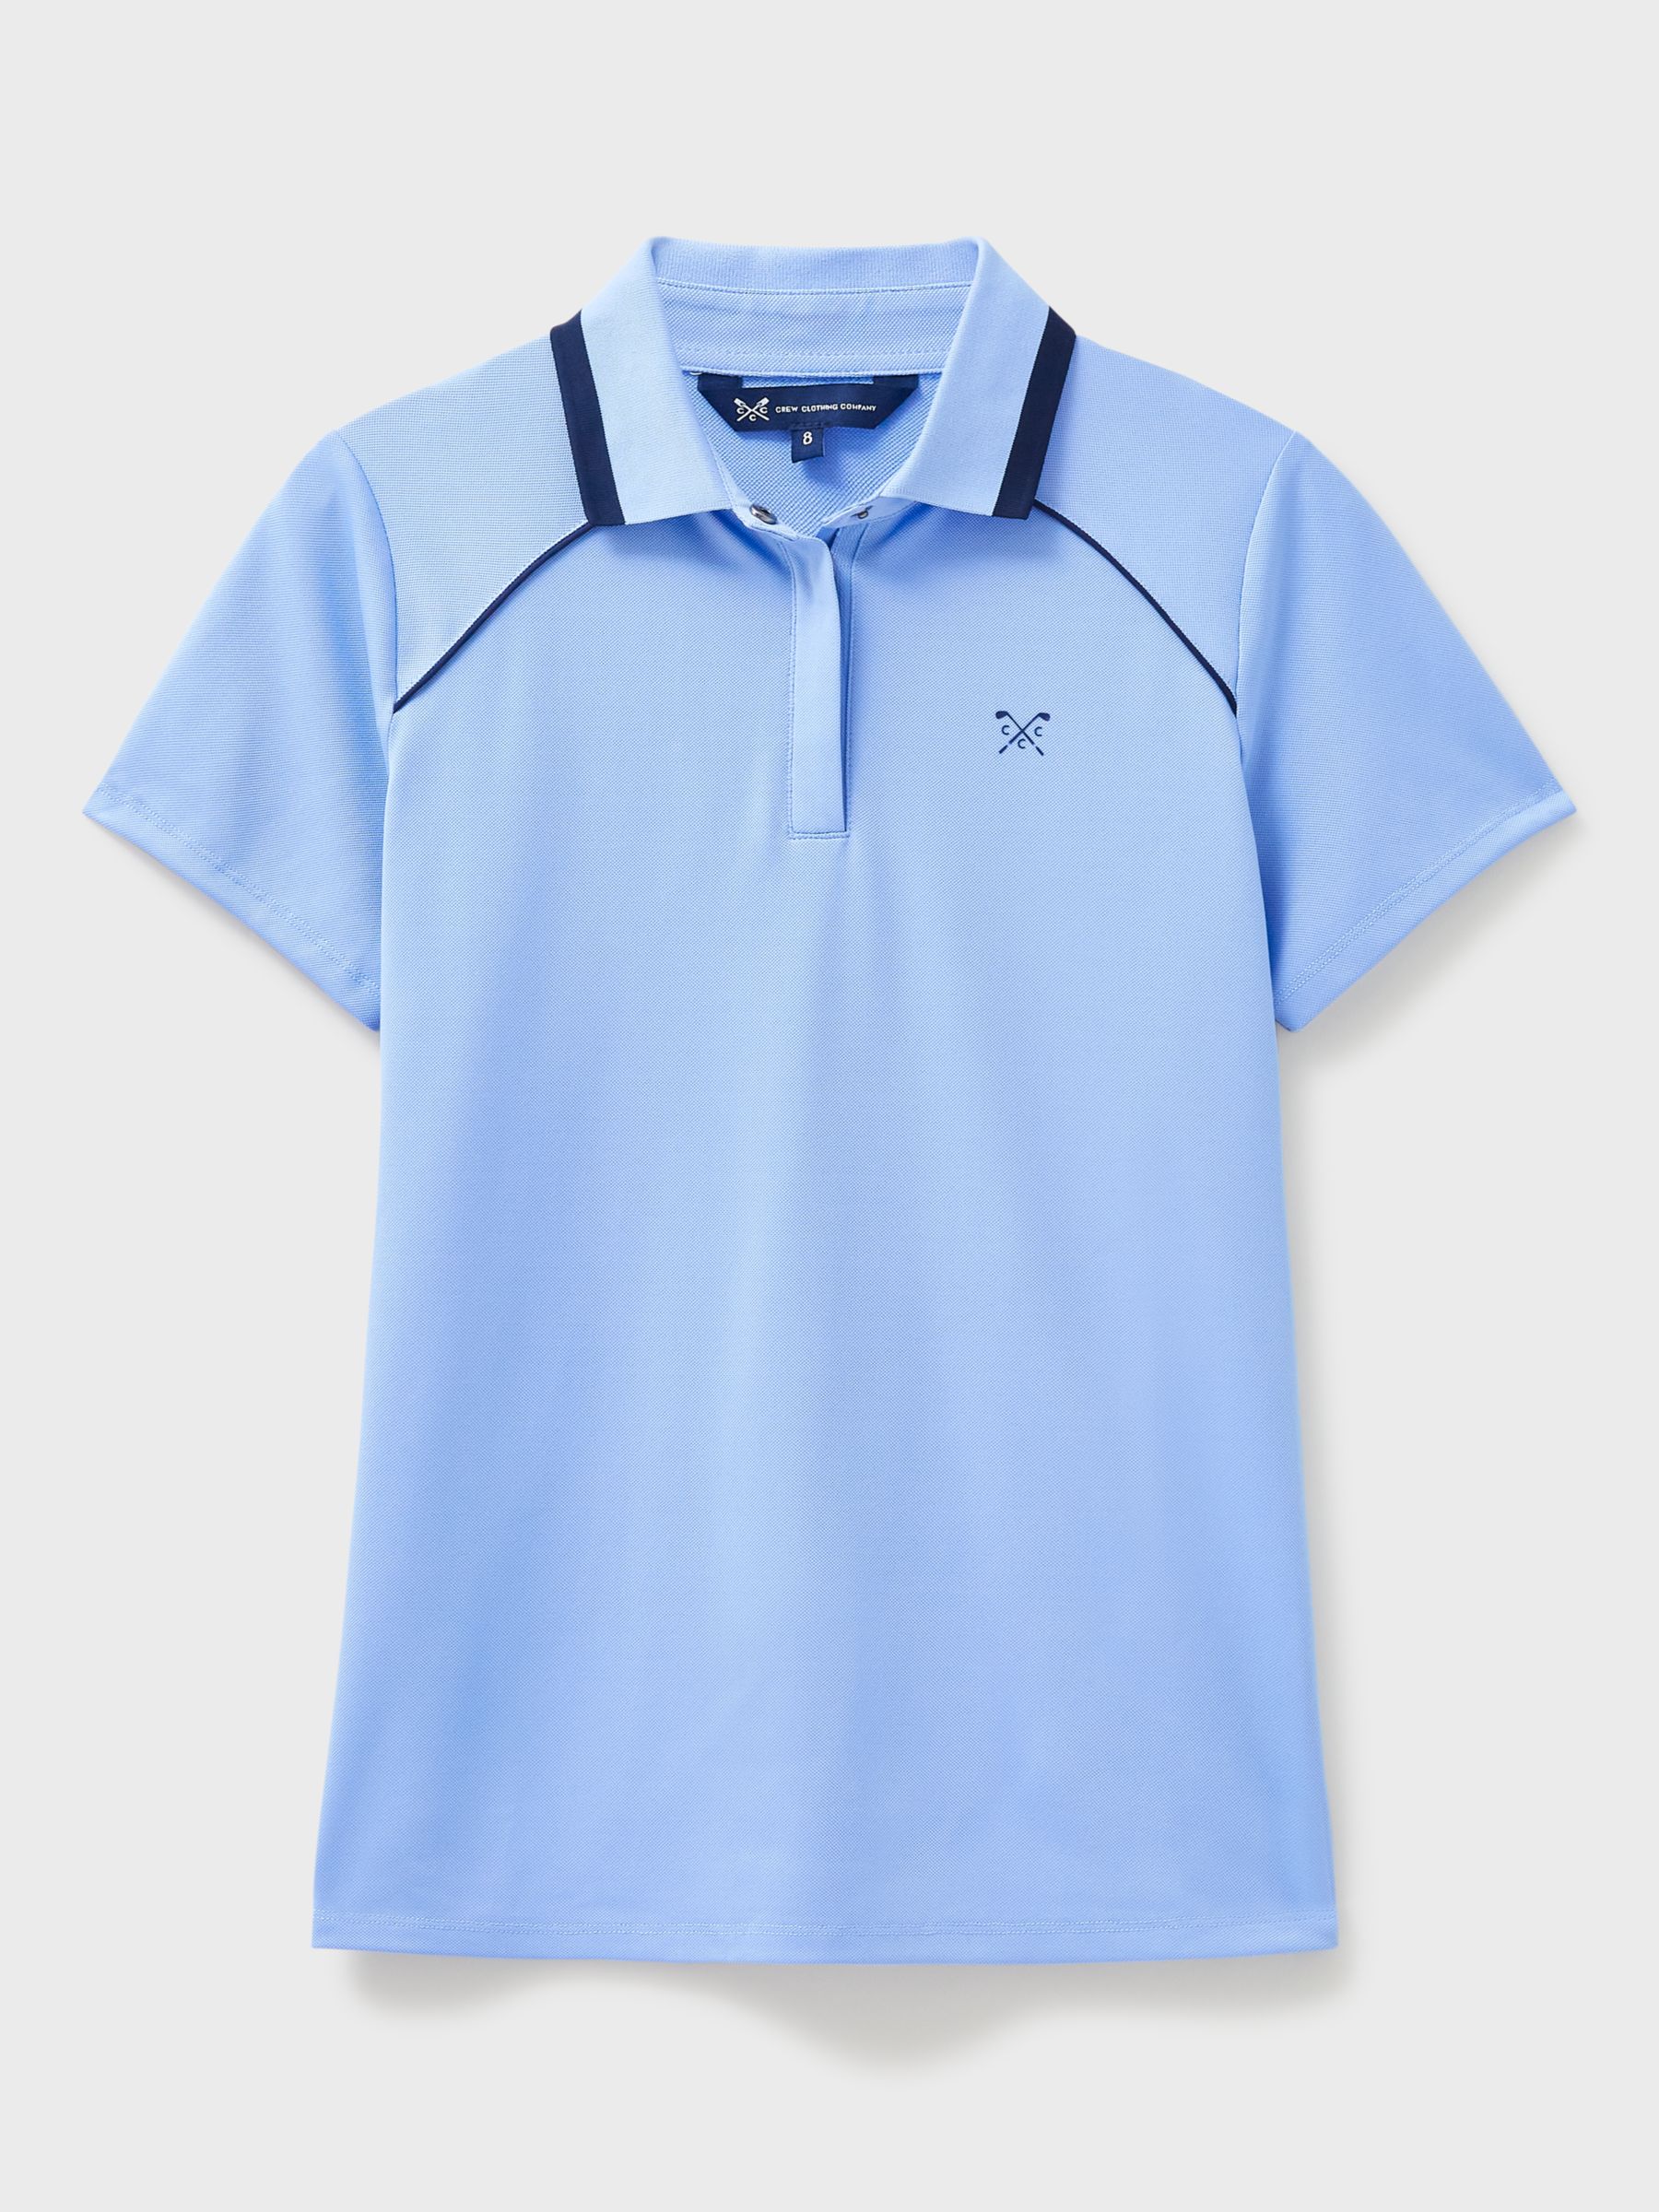 Crew Clothing Piped Cotton Golf Polo Shirt, Light Blue, 16